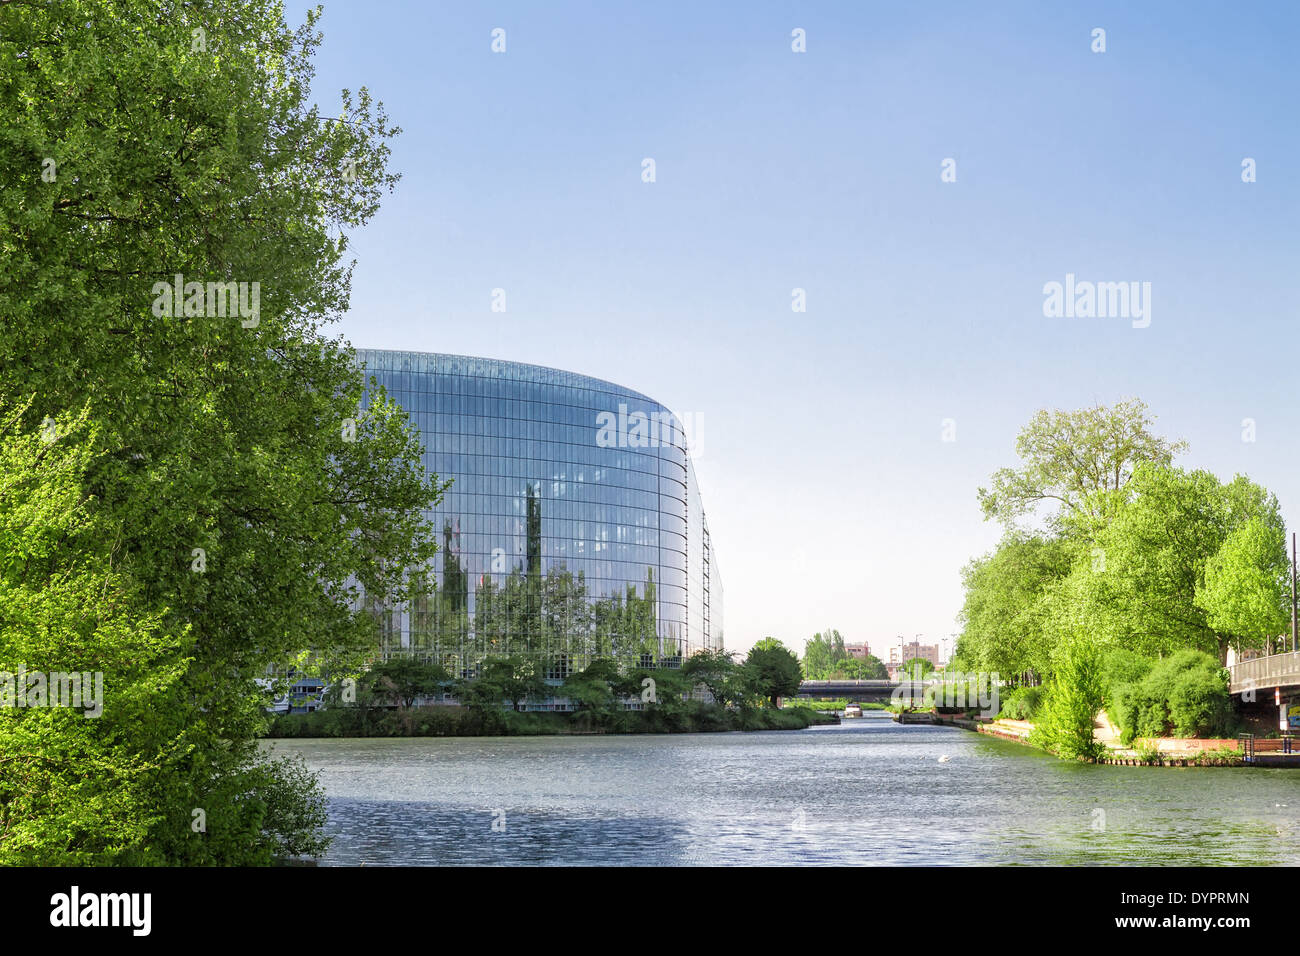 Strasbourg, France. The building houses the Chamber of Parliament and Members' offices. Stock Photo